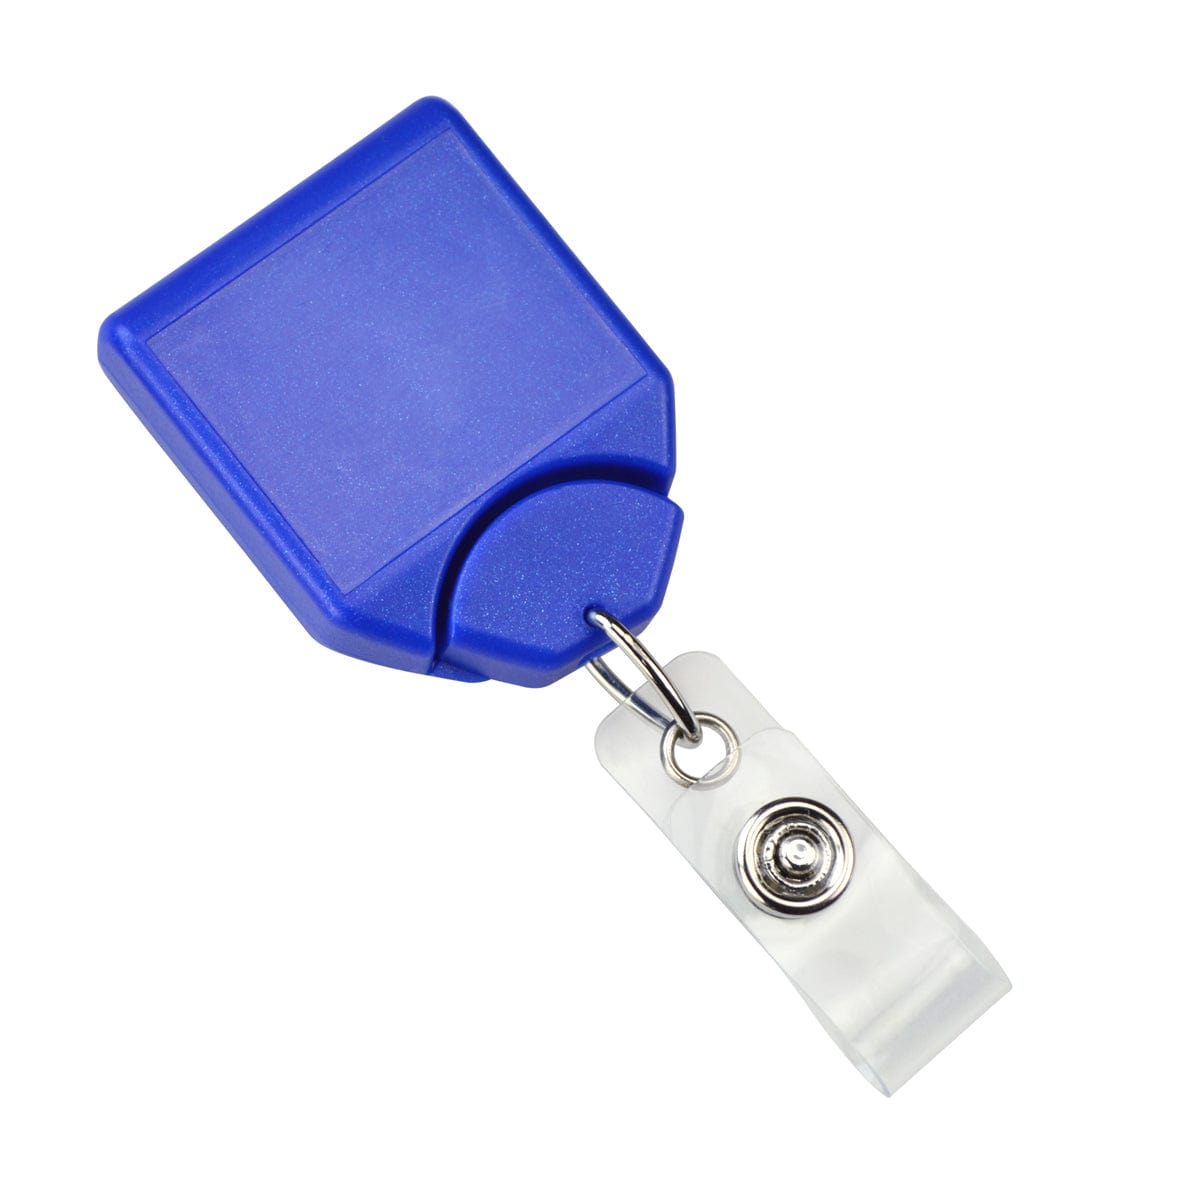 Translucent Royal Blue Max Label Round Badge Reel with Swivel Clip - 25pk